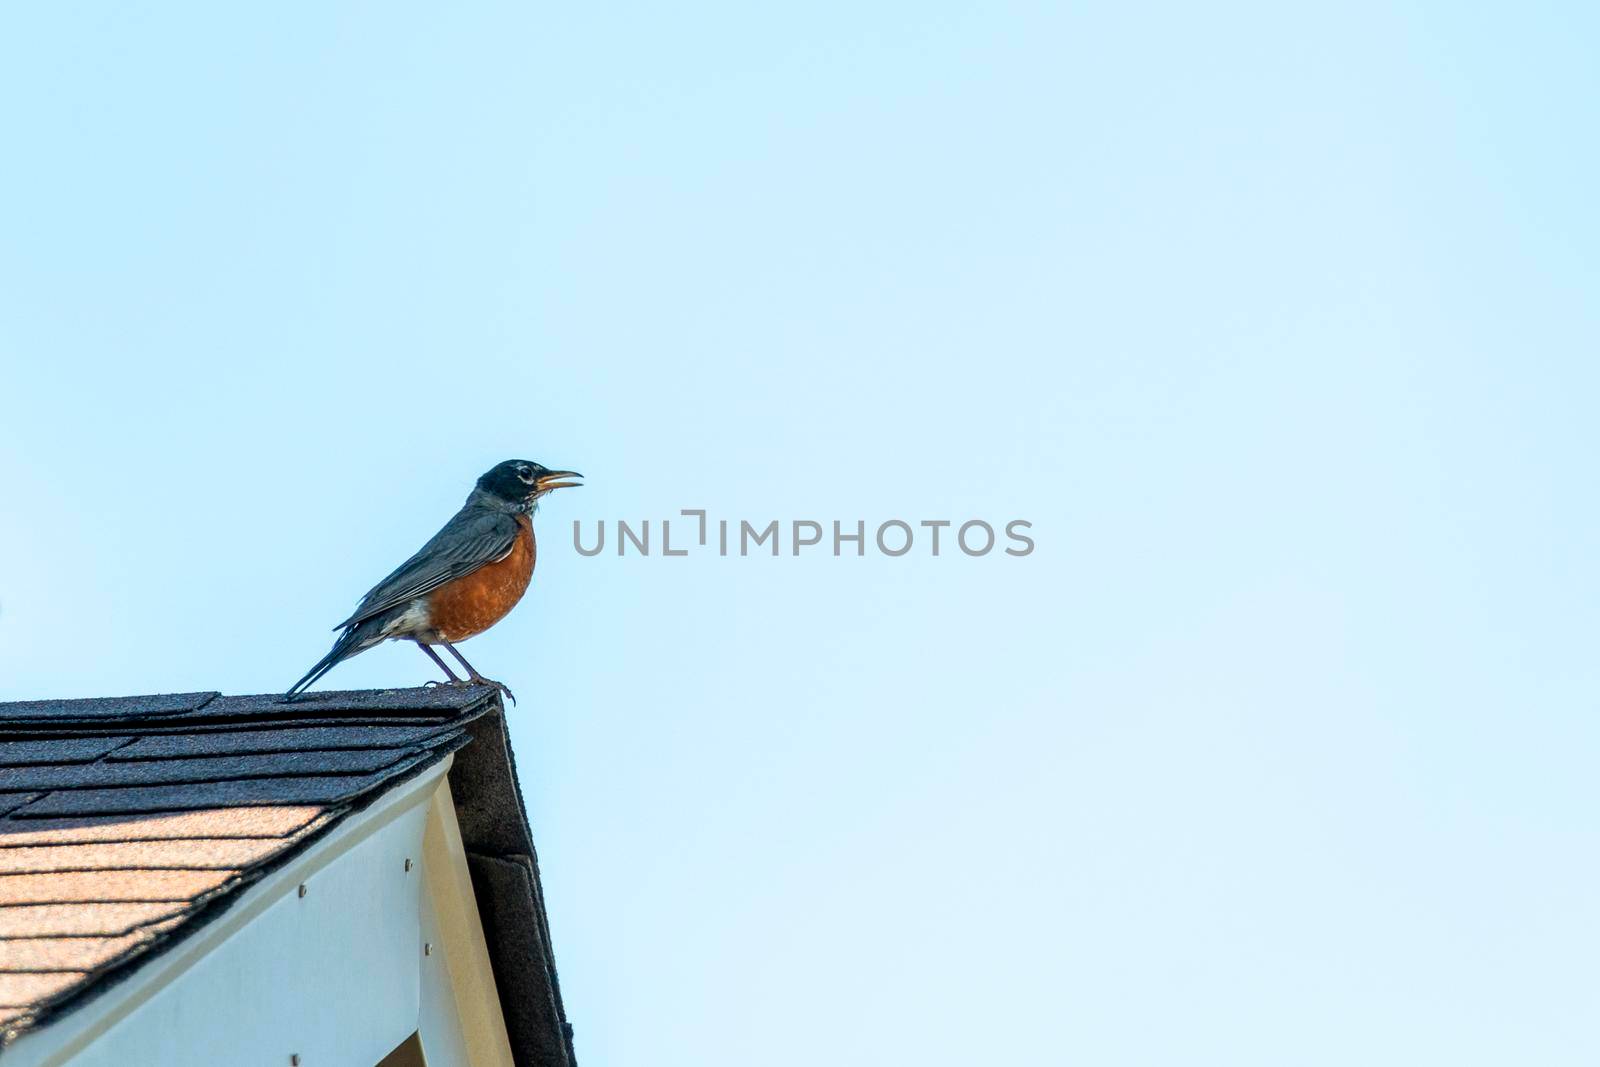 A bird with an orange breast stands on the roof calling for a female by singing